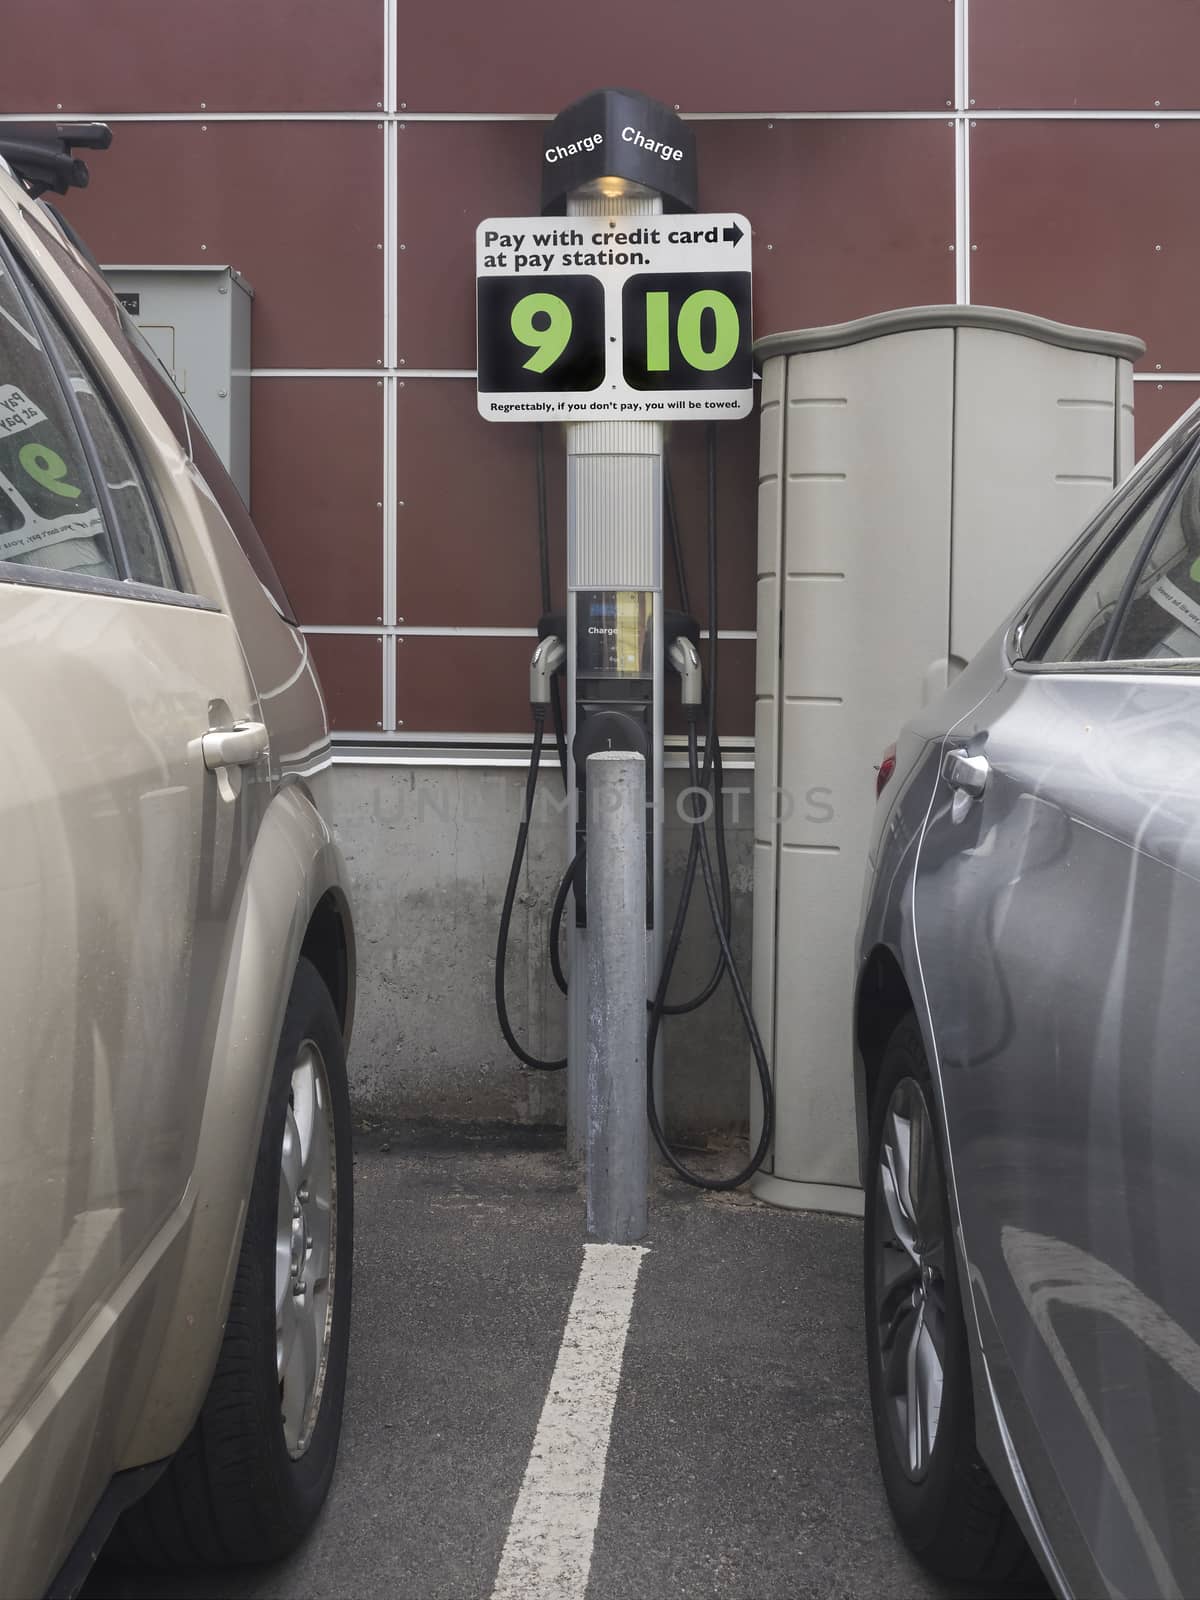 Electric car charging station with credit card or cast payment options